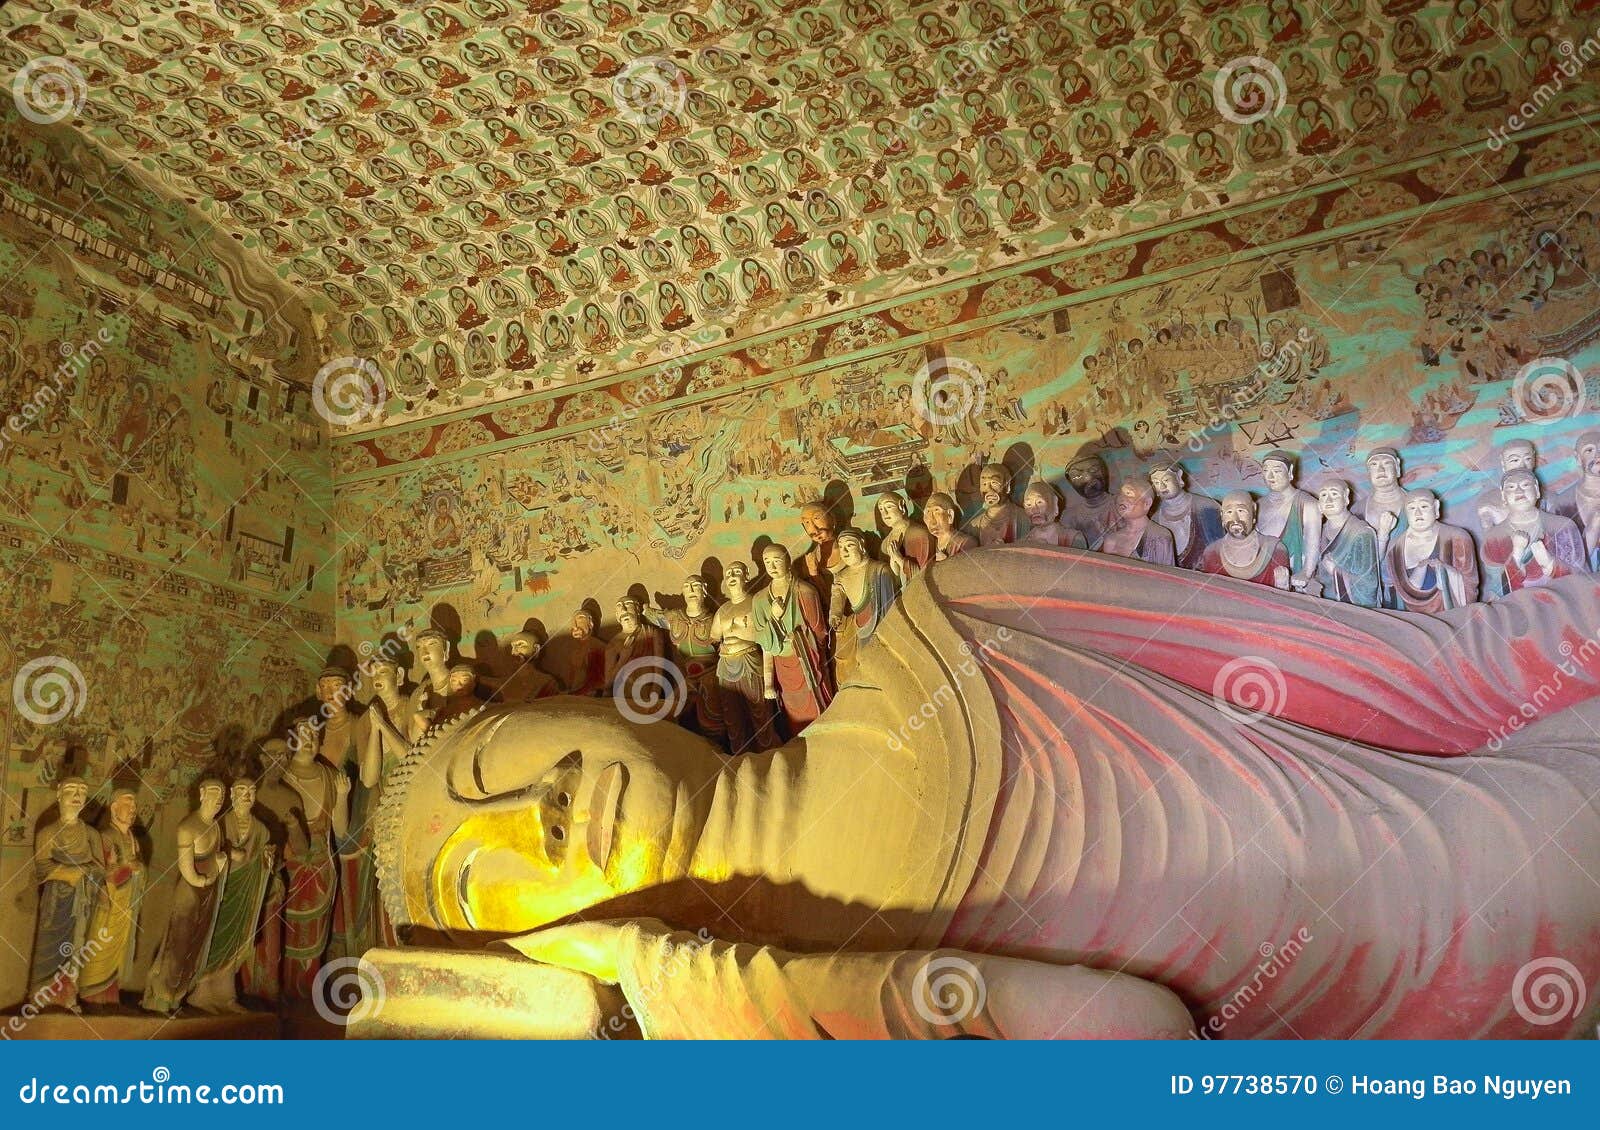 mogao caves in dunhuang, china